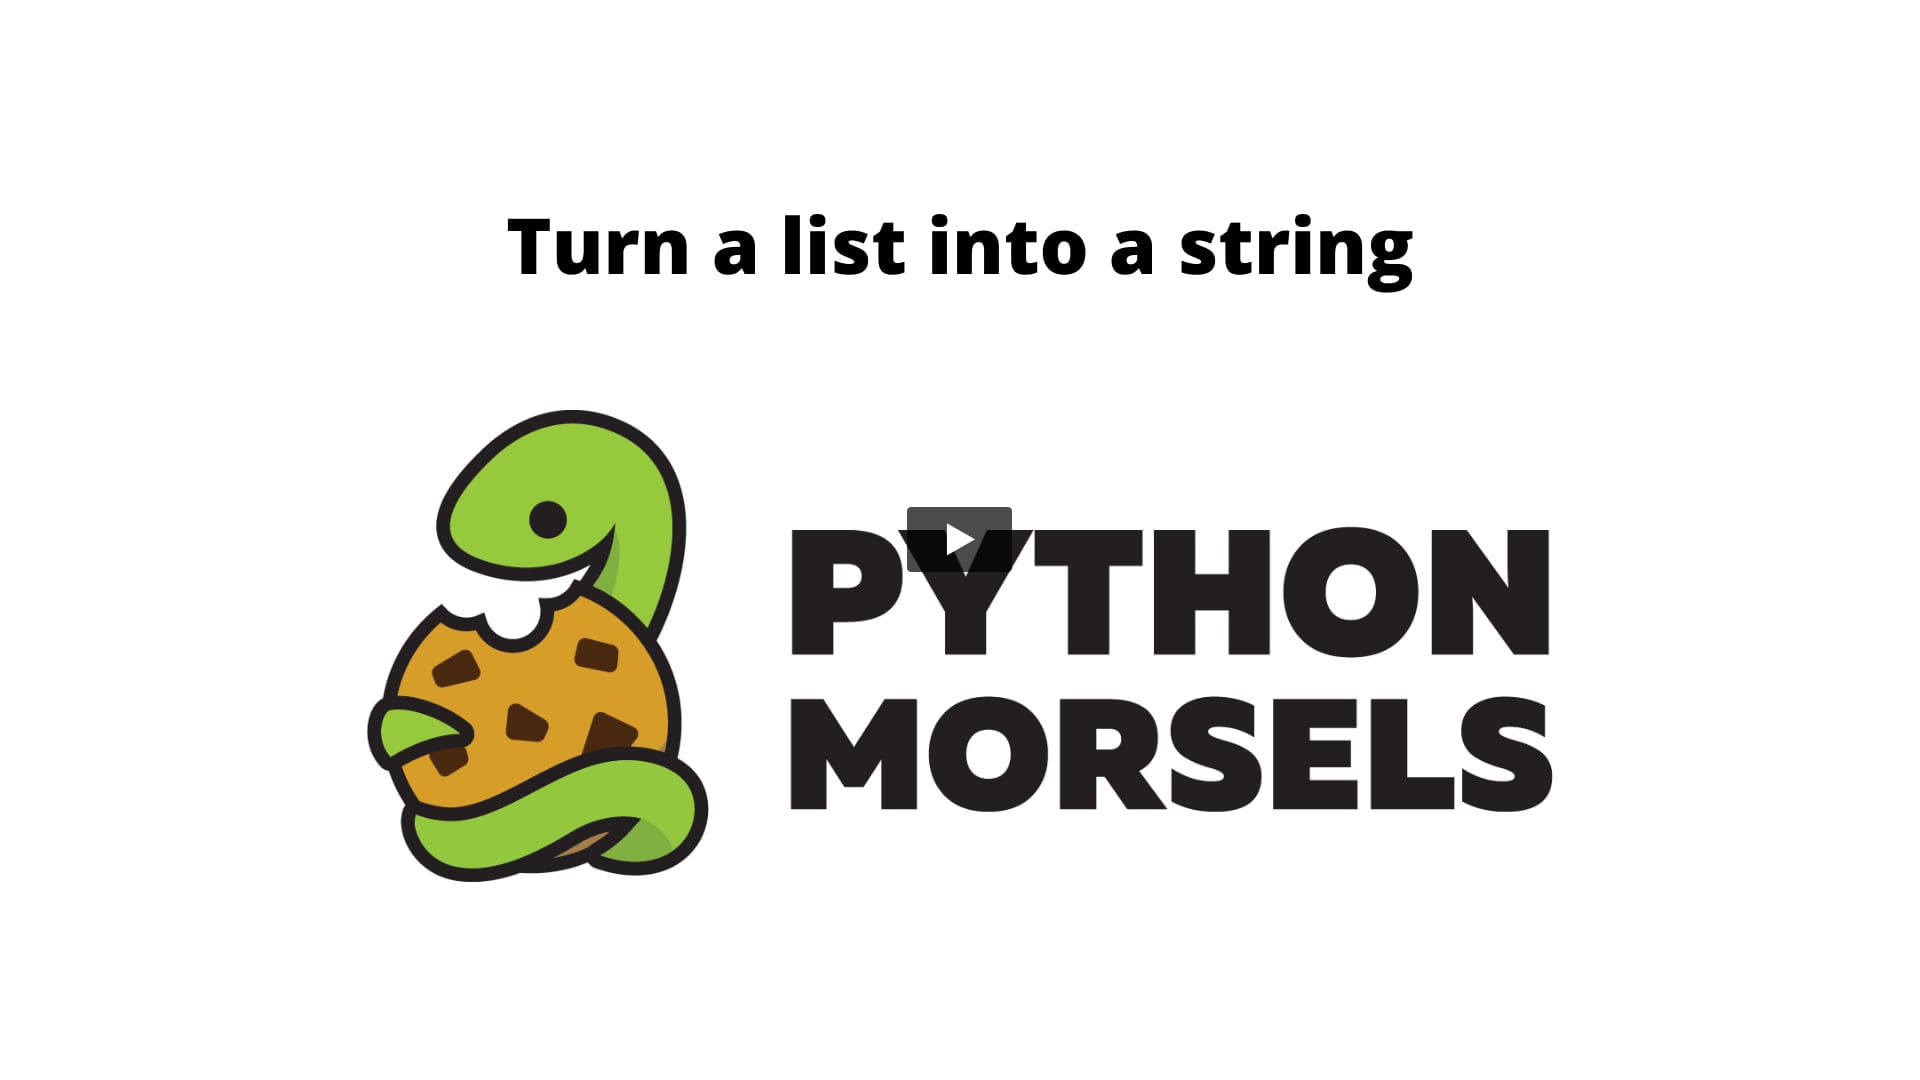 Python Morsels: Turn a list into a string